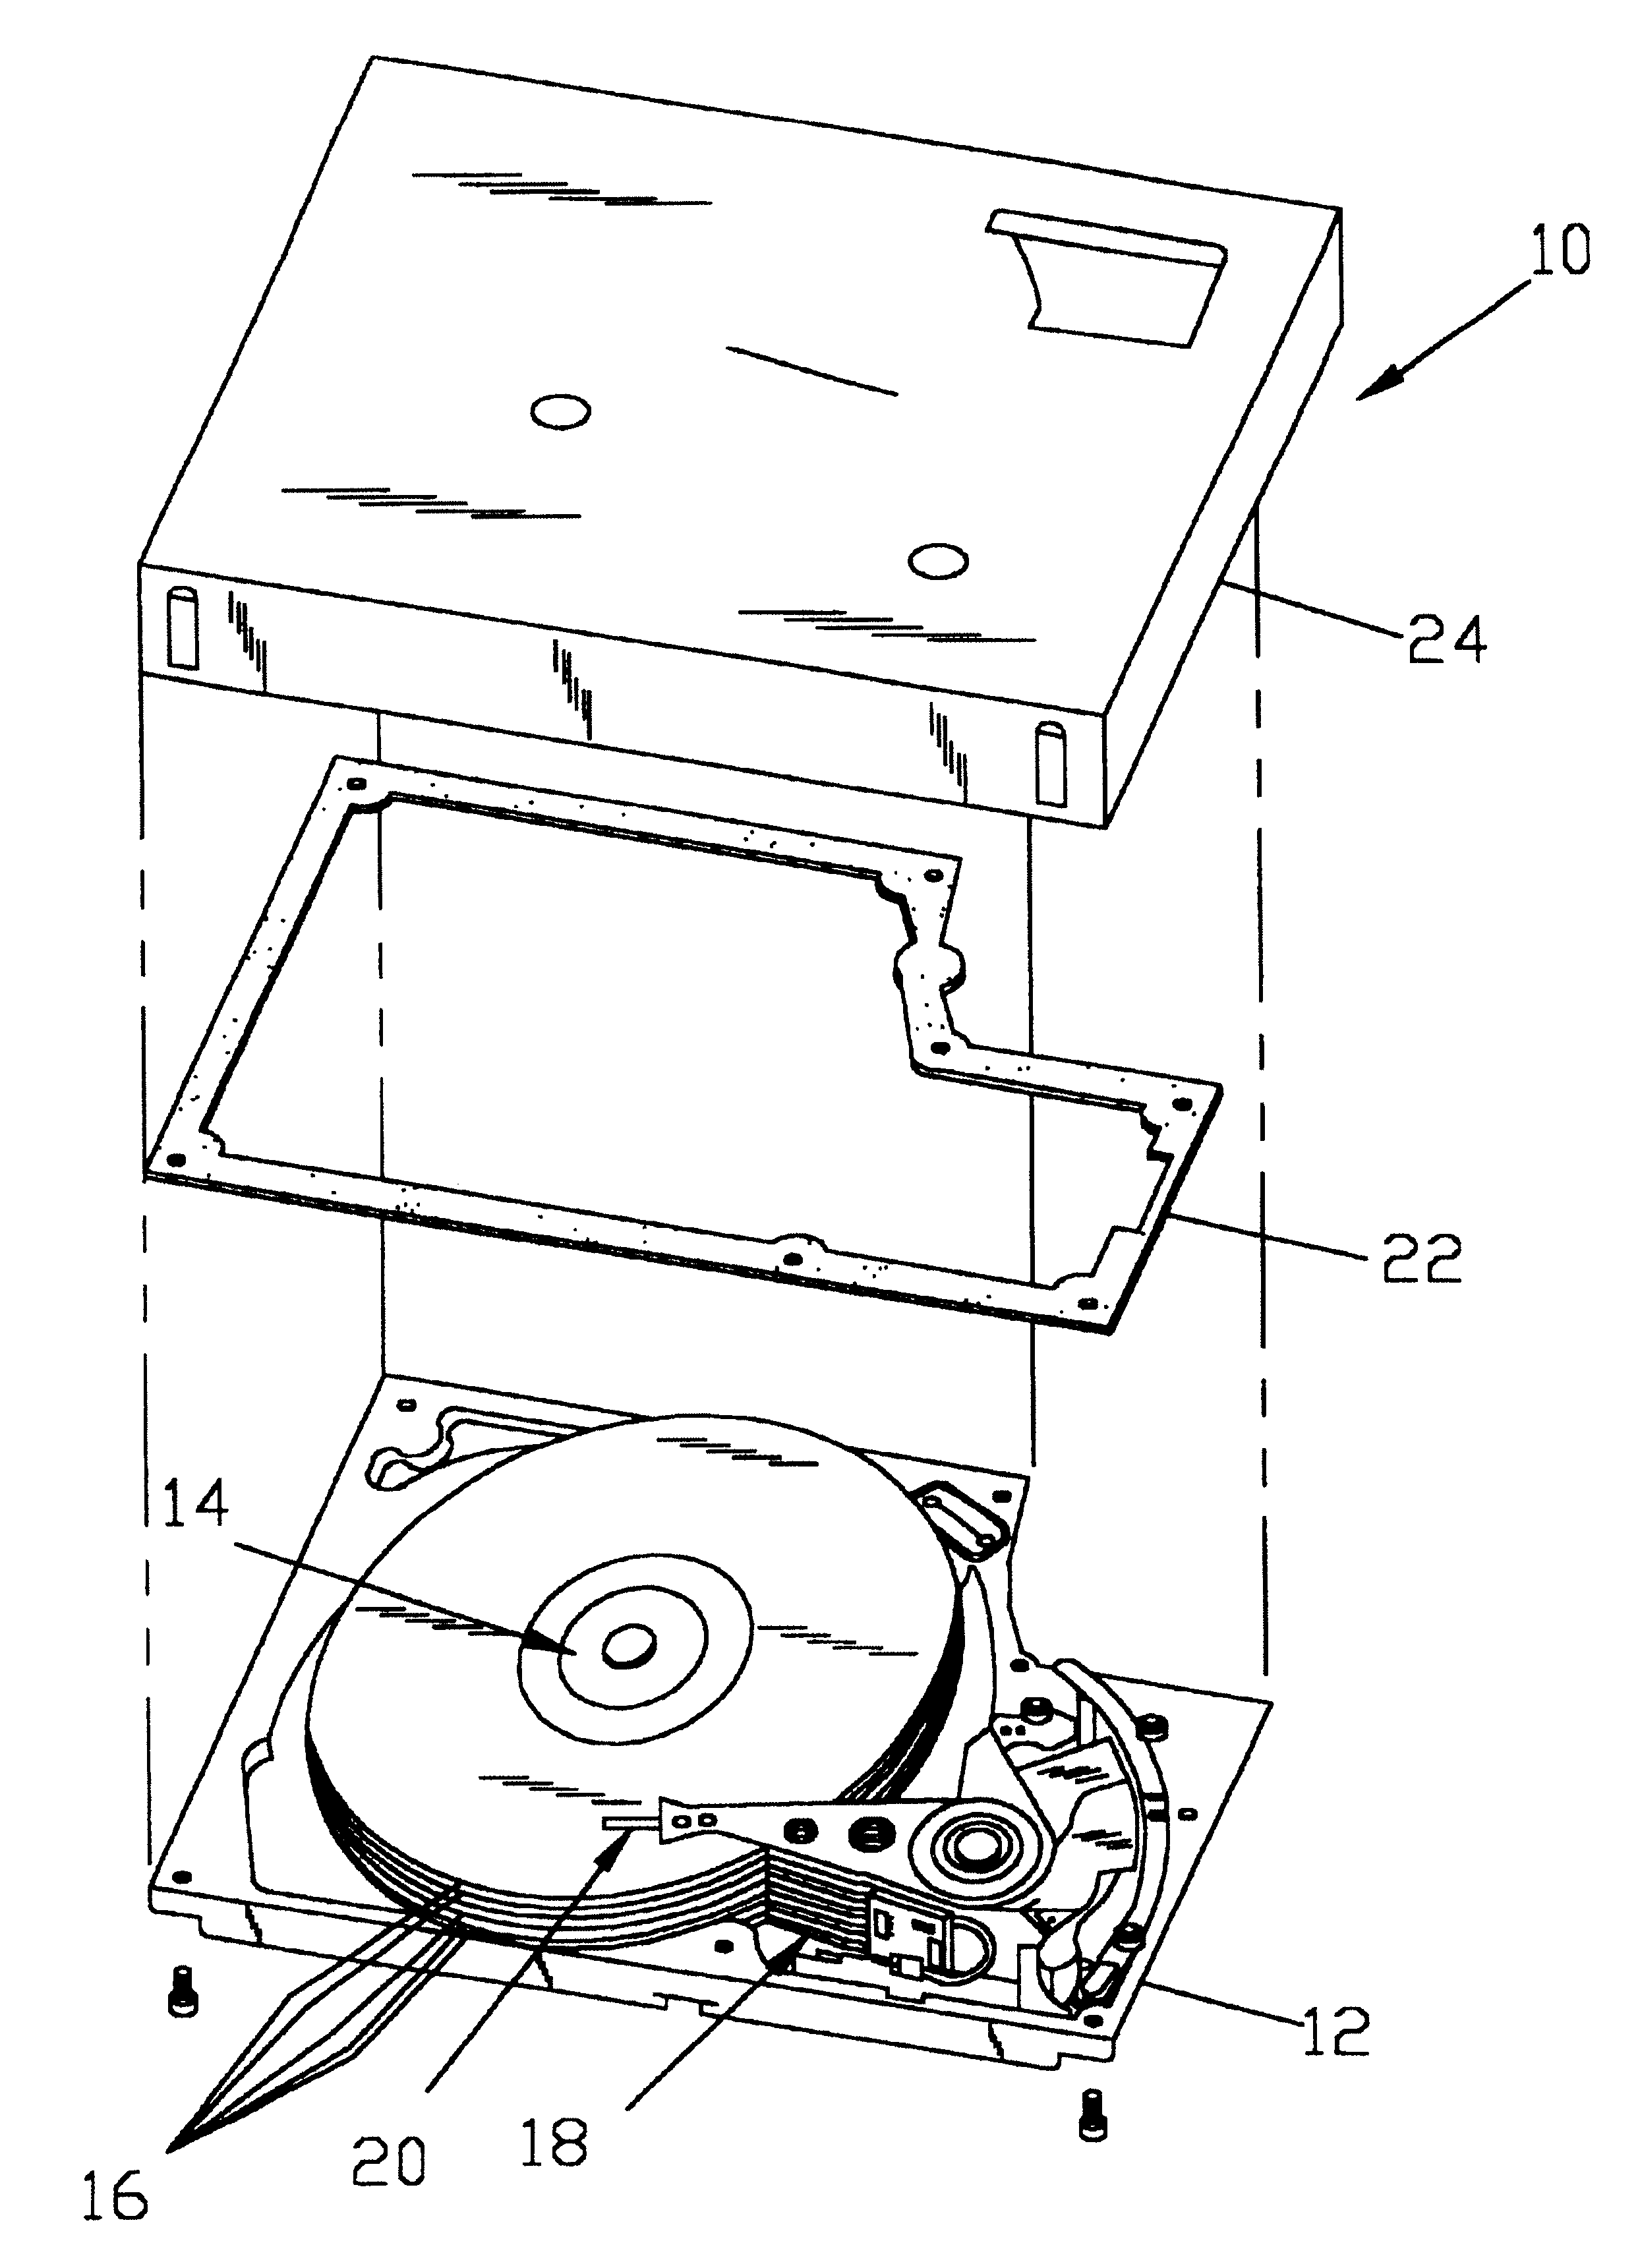 Design of a rigid disc plastic substrate with high stiffness insert